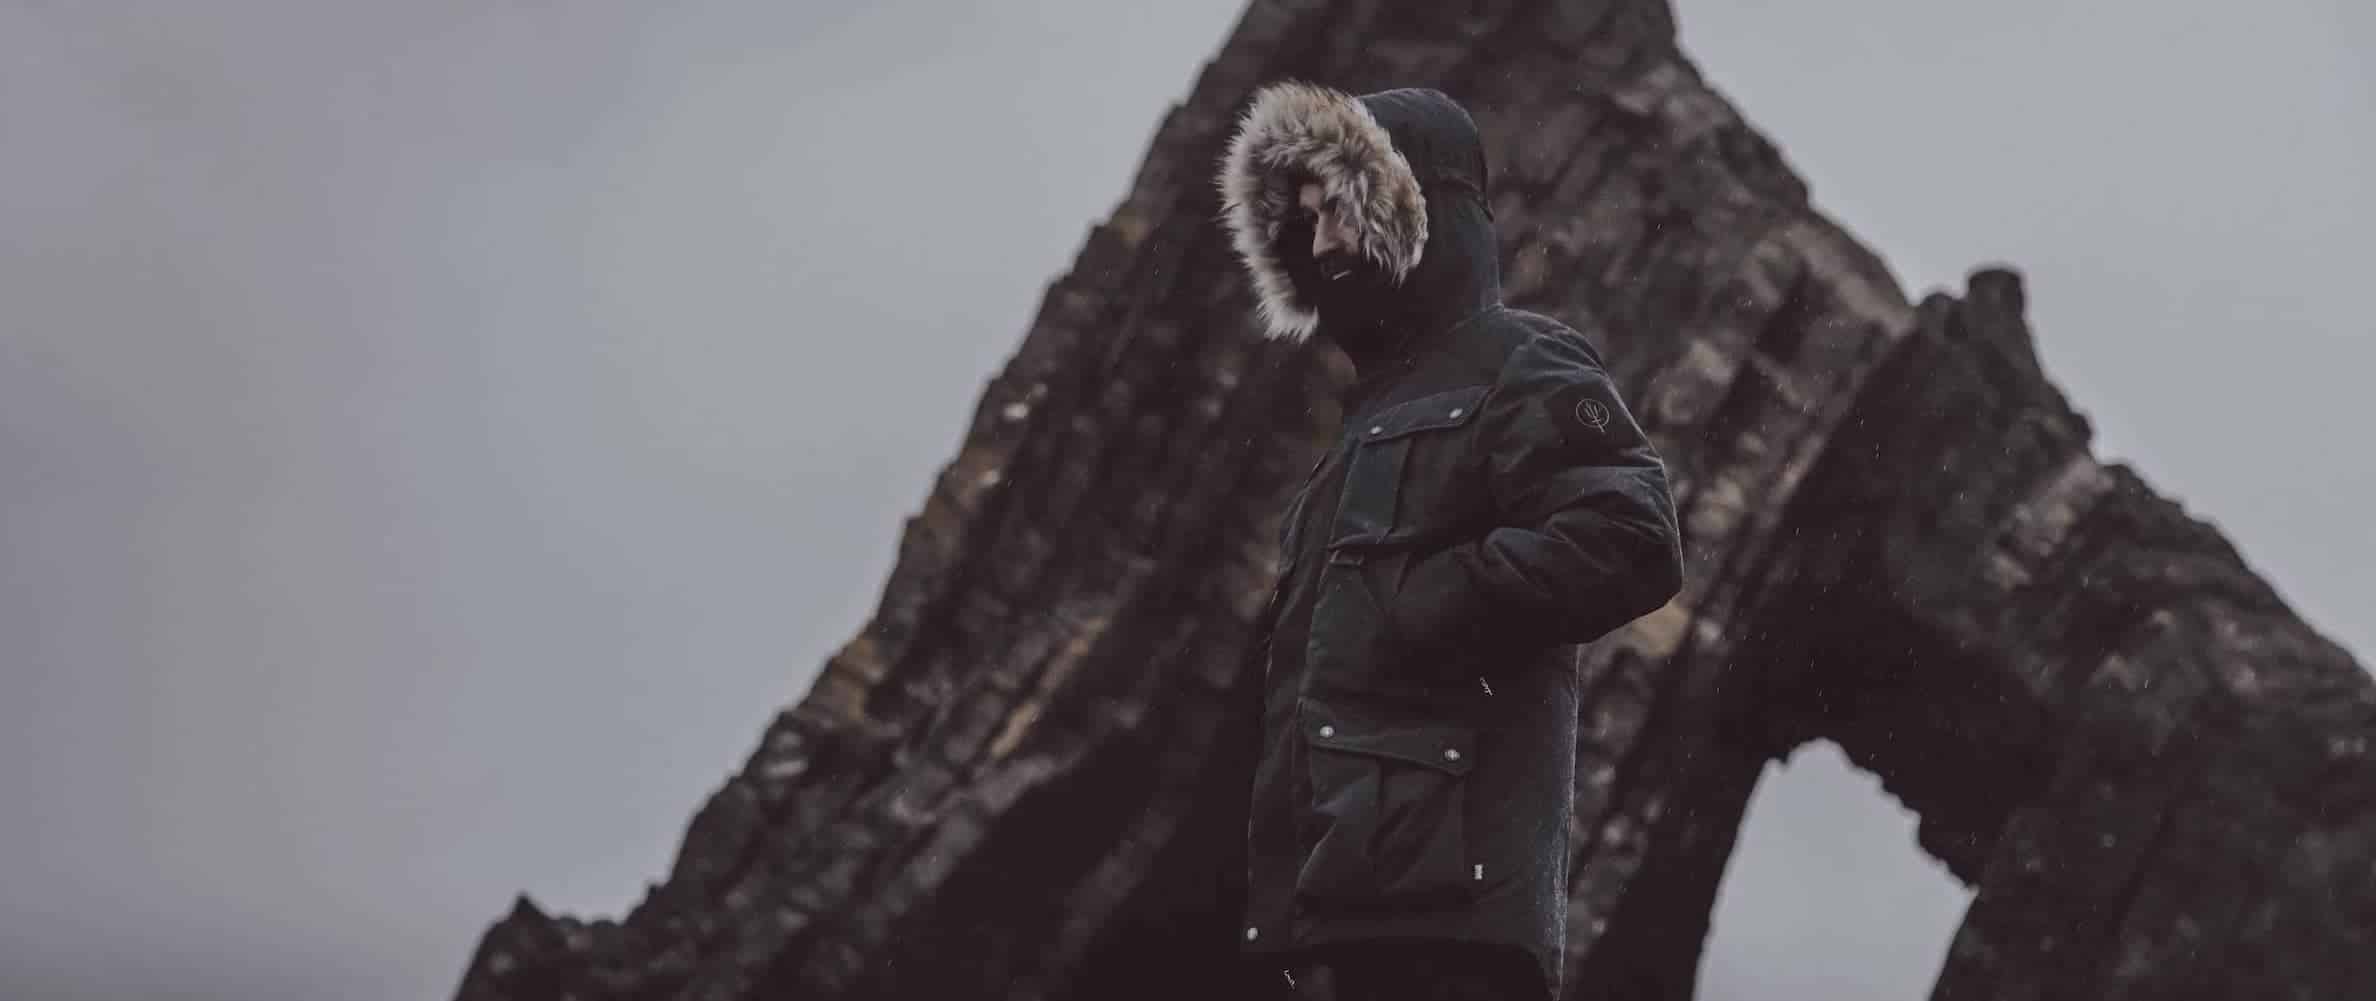 The thrudark end of days parka will protect through adversity